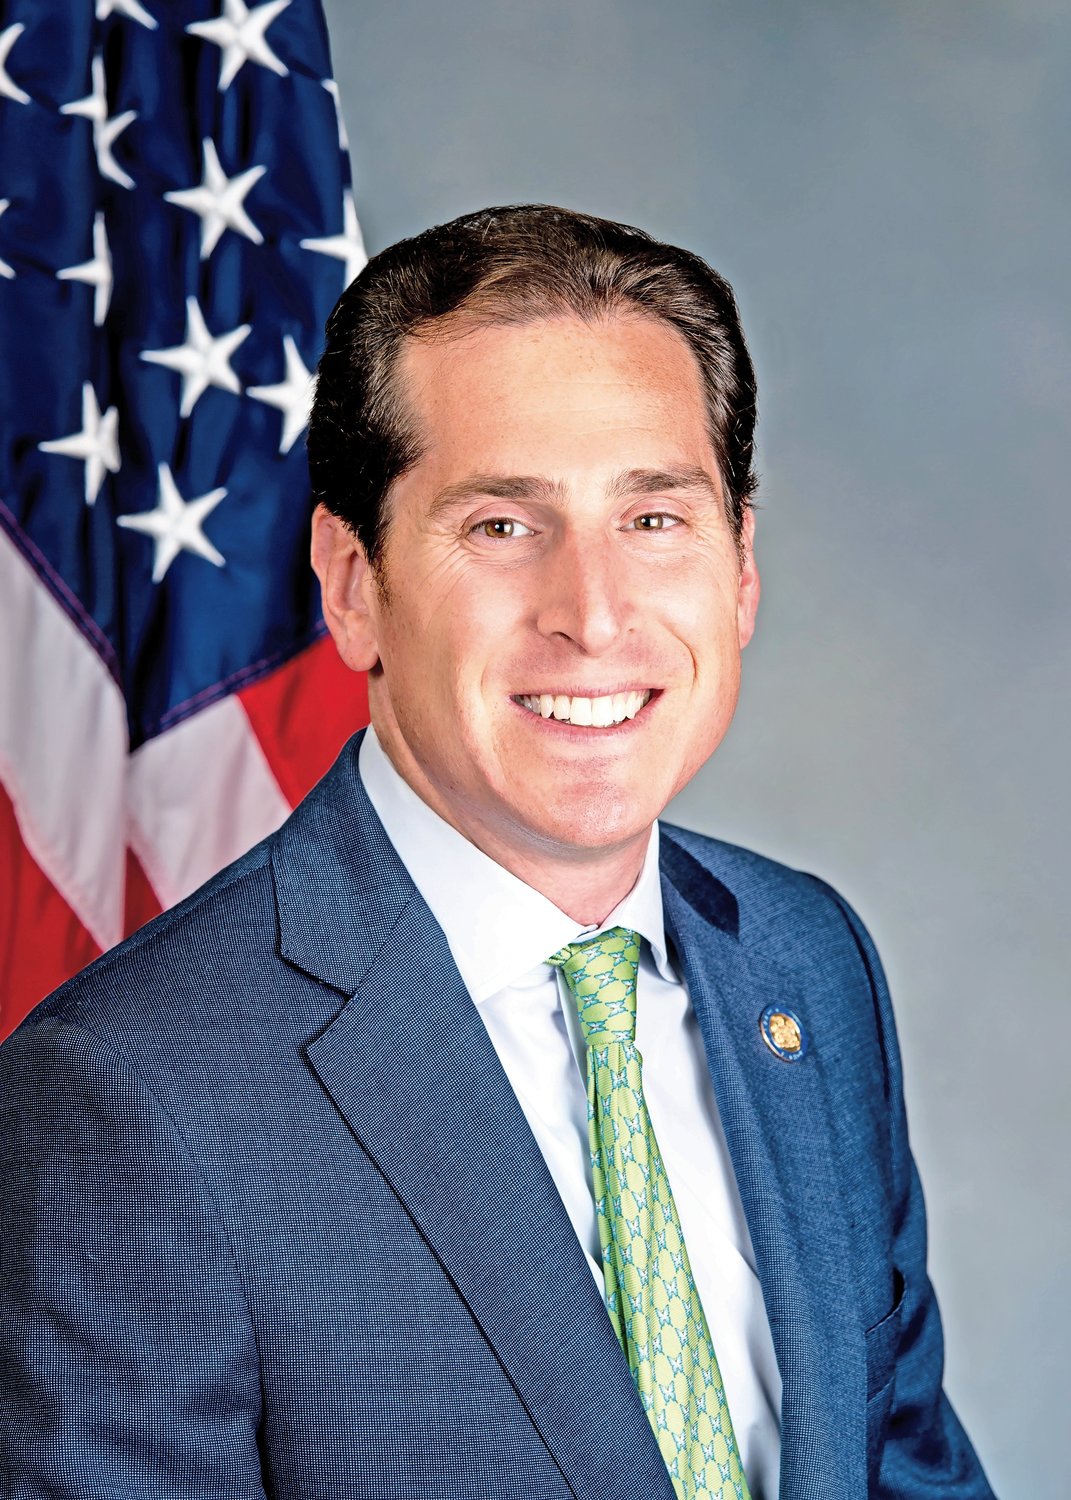 State Sen. Todd Kaminsky is advocating for the public approval of the $3 billion Clean Water, Green Jobs, New York Bond Act.